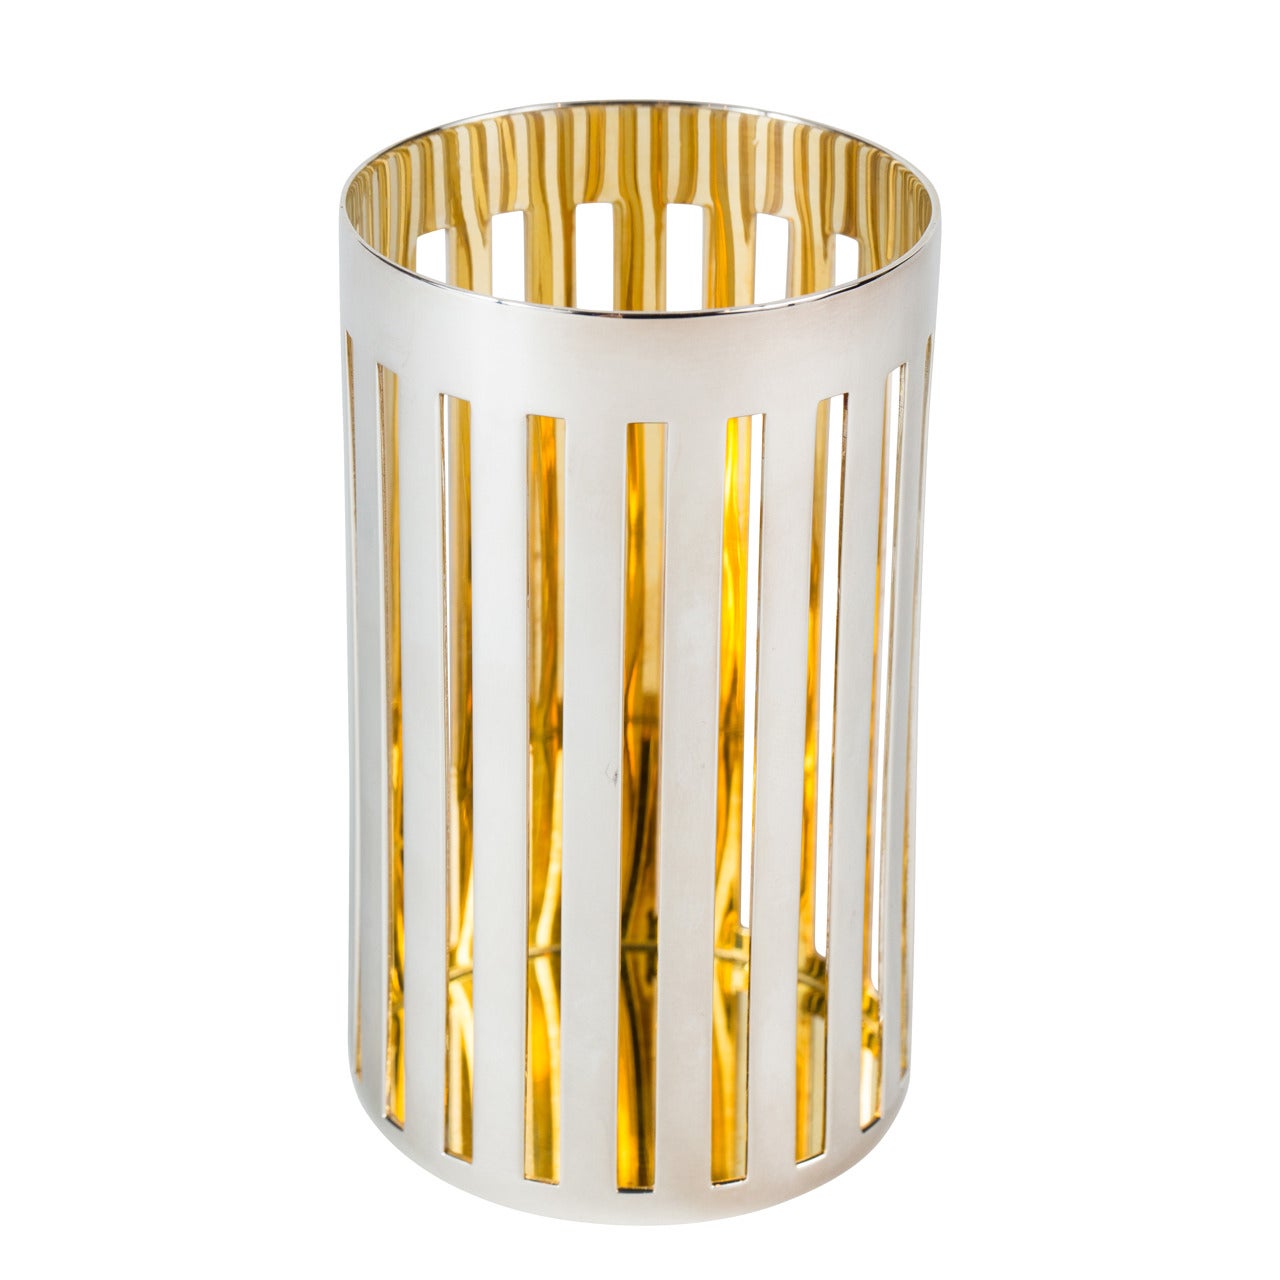 Sterling Silver and Vermeil Pencil Cup by Bulgari